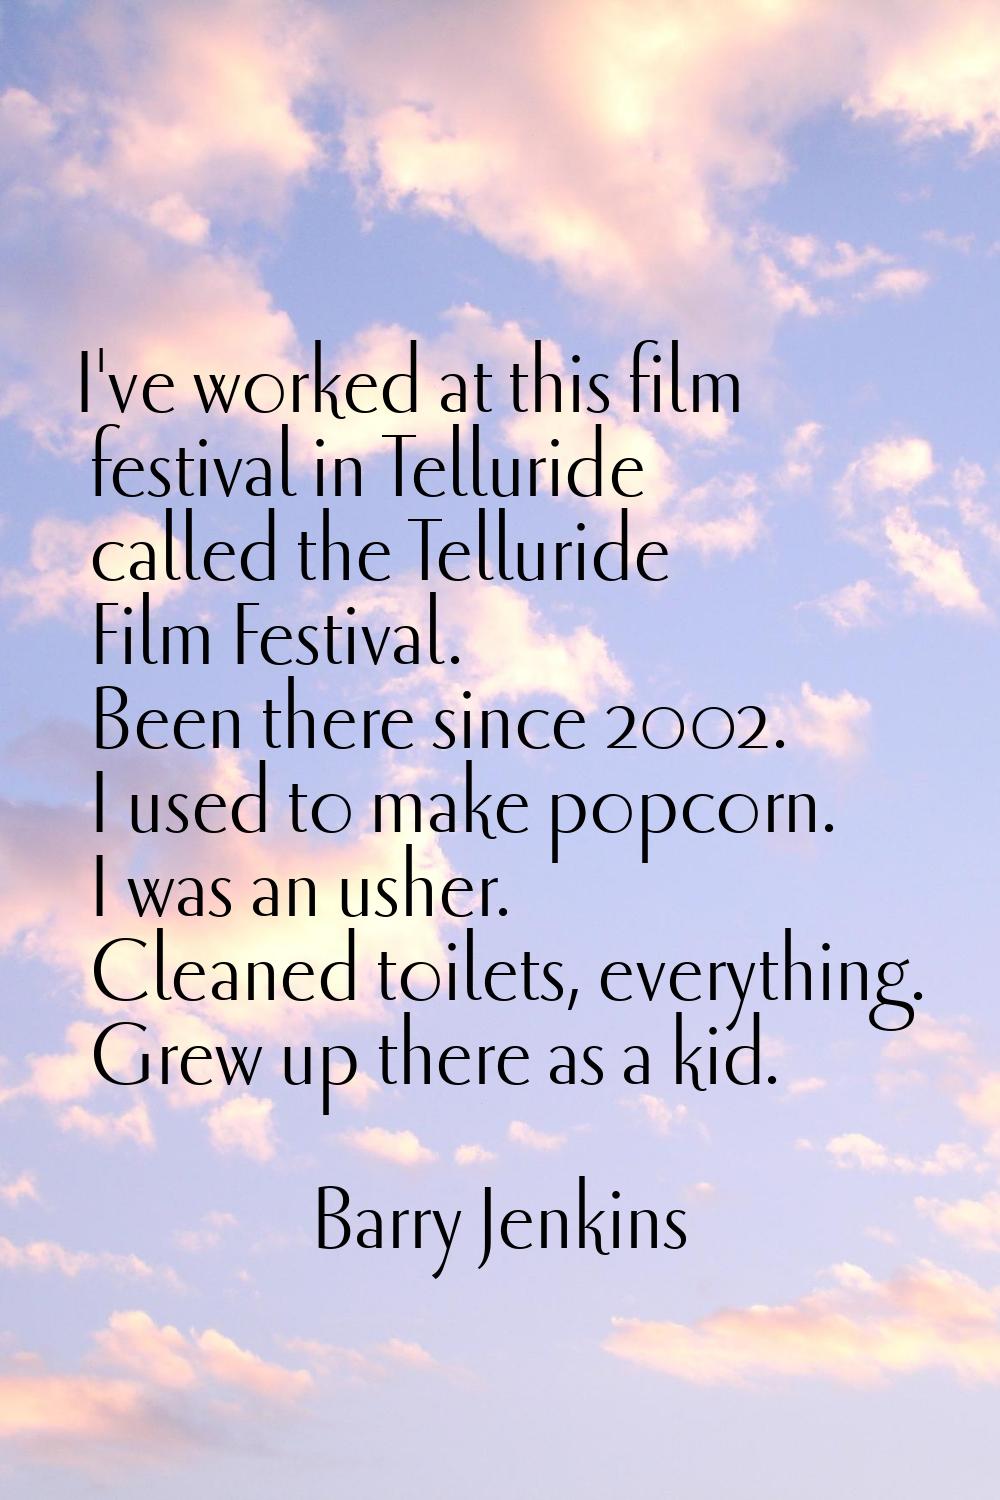 I've worked at this film festival in Telluride called the Telluride Film Festival. Been there since